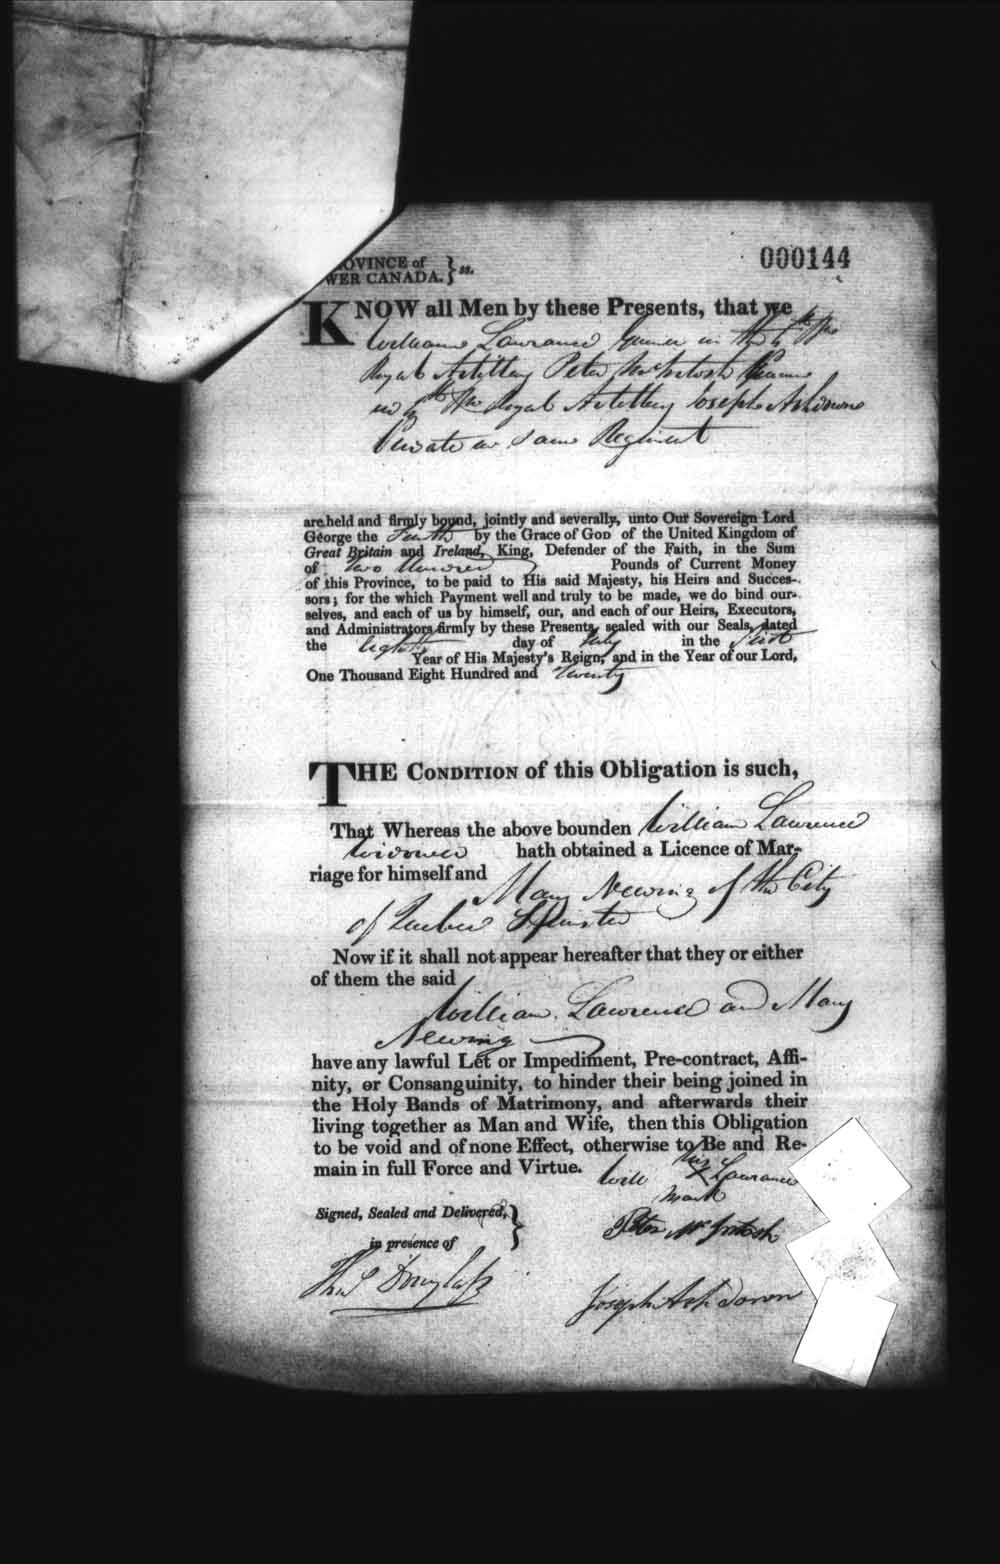 Digitized page of Upper and Lower Canada Marriage Bonds (1779-1865) for Image No.: e008235985